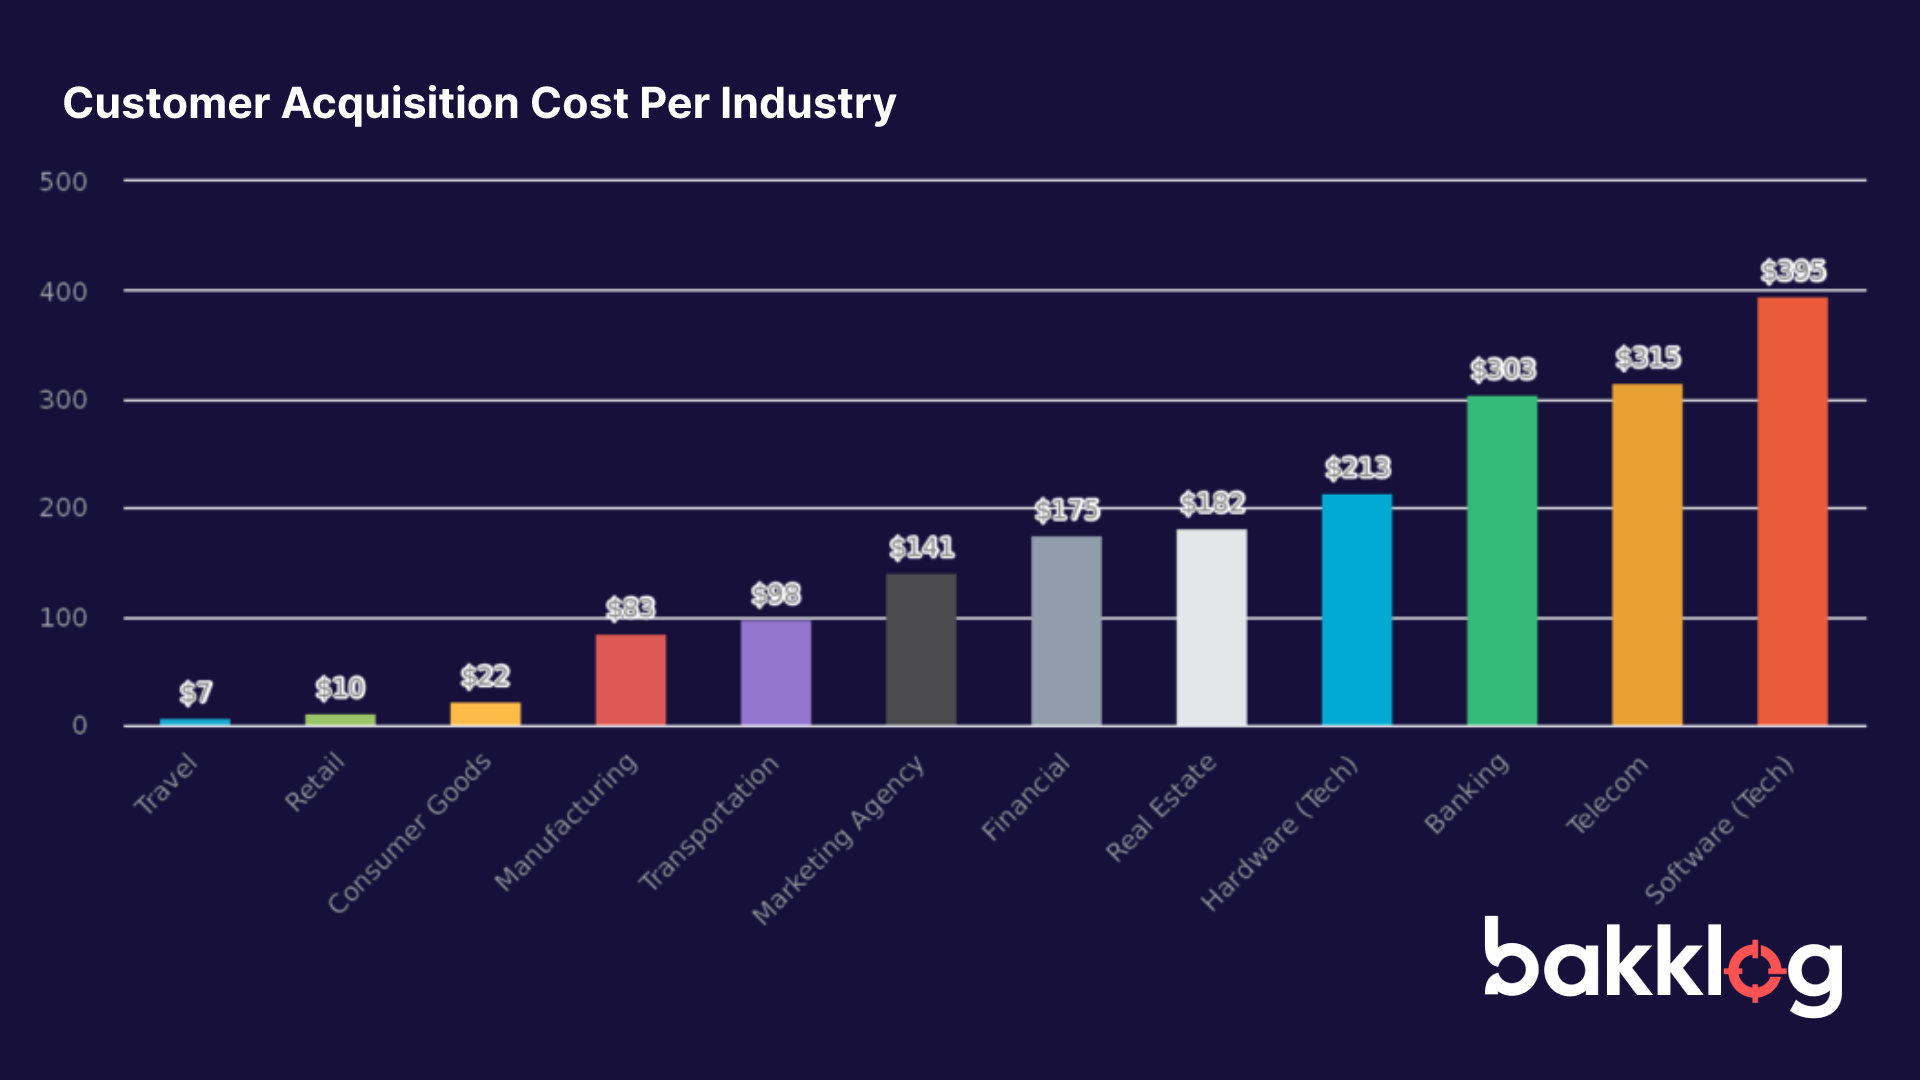 Chart showing the customer acquisition cost per industry